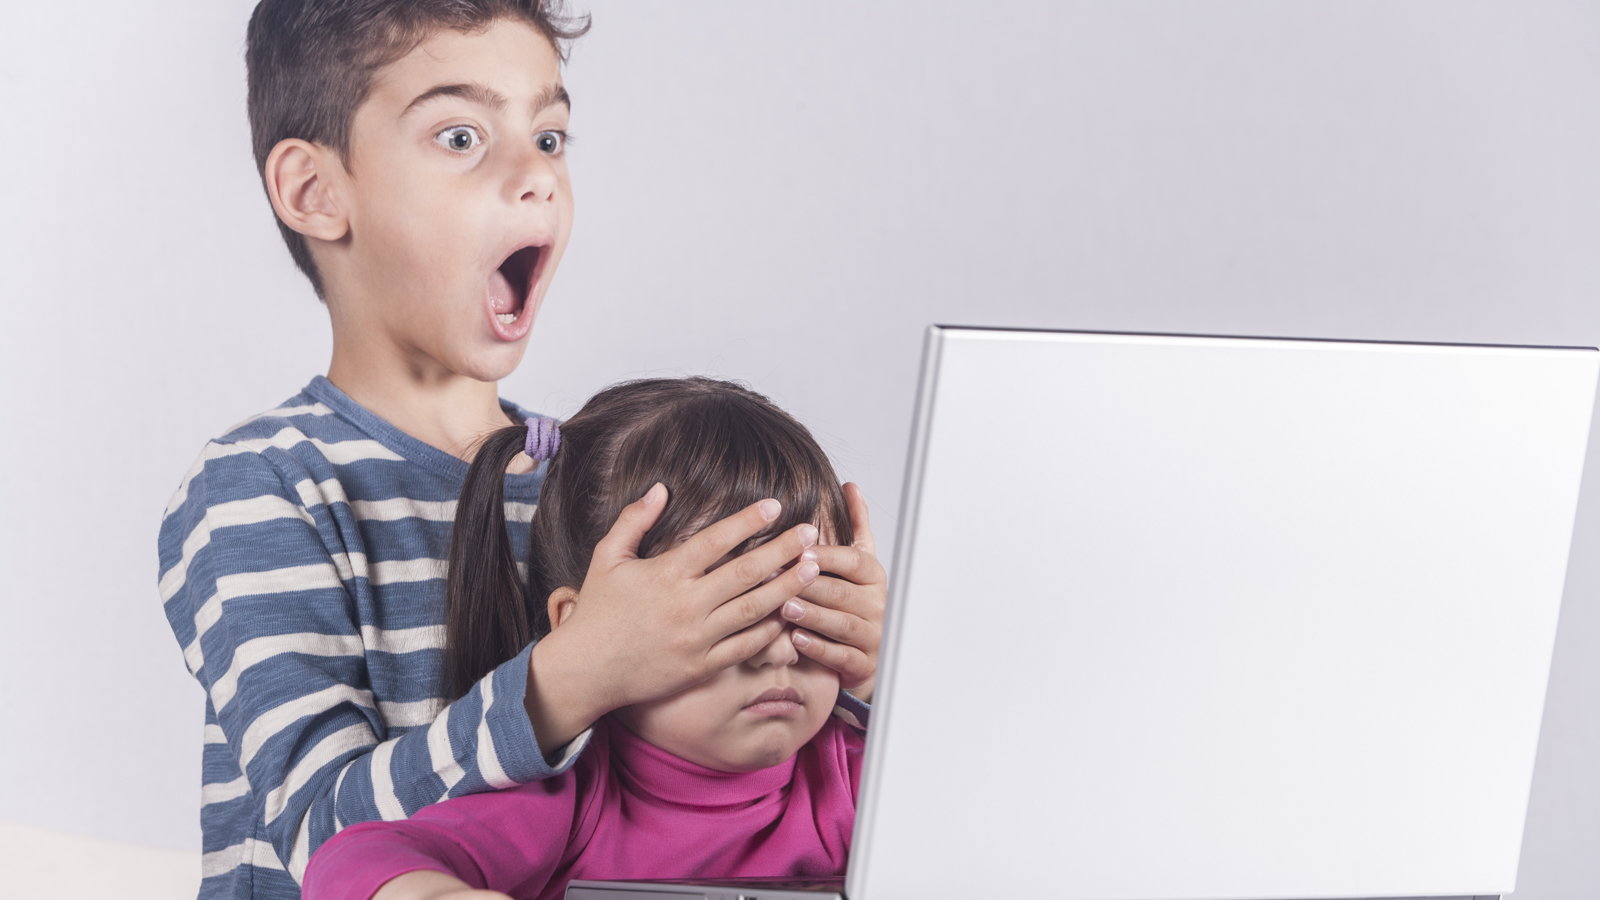 boy covering sister's eyes while looking at laptop